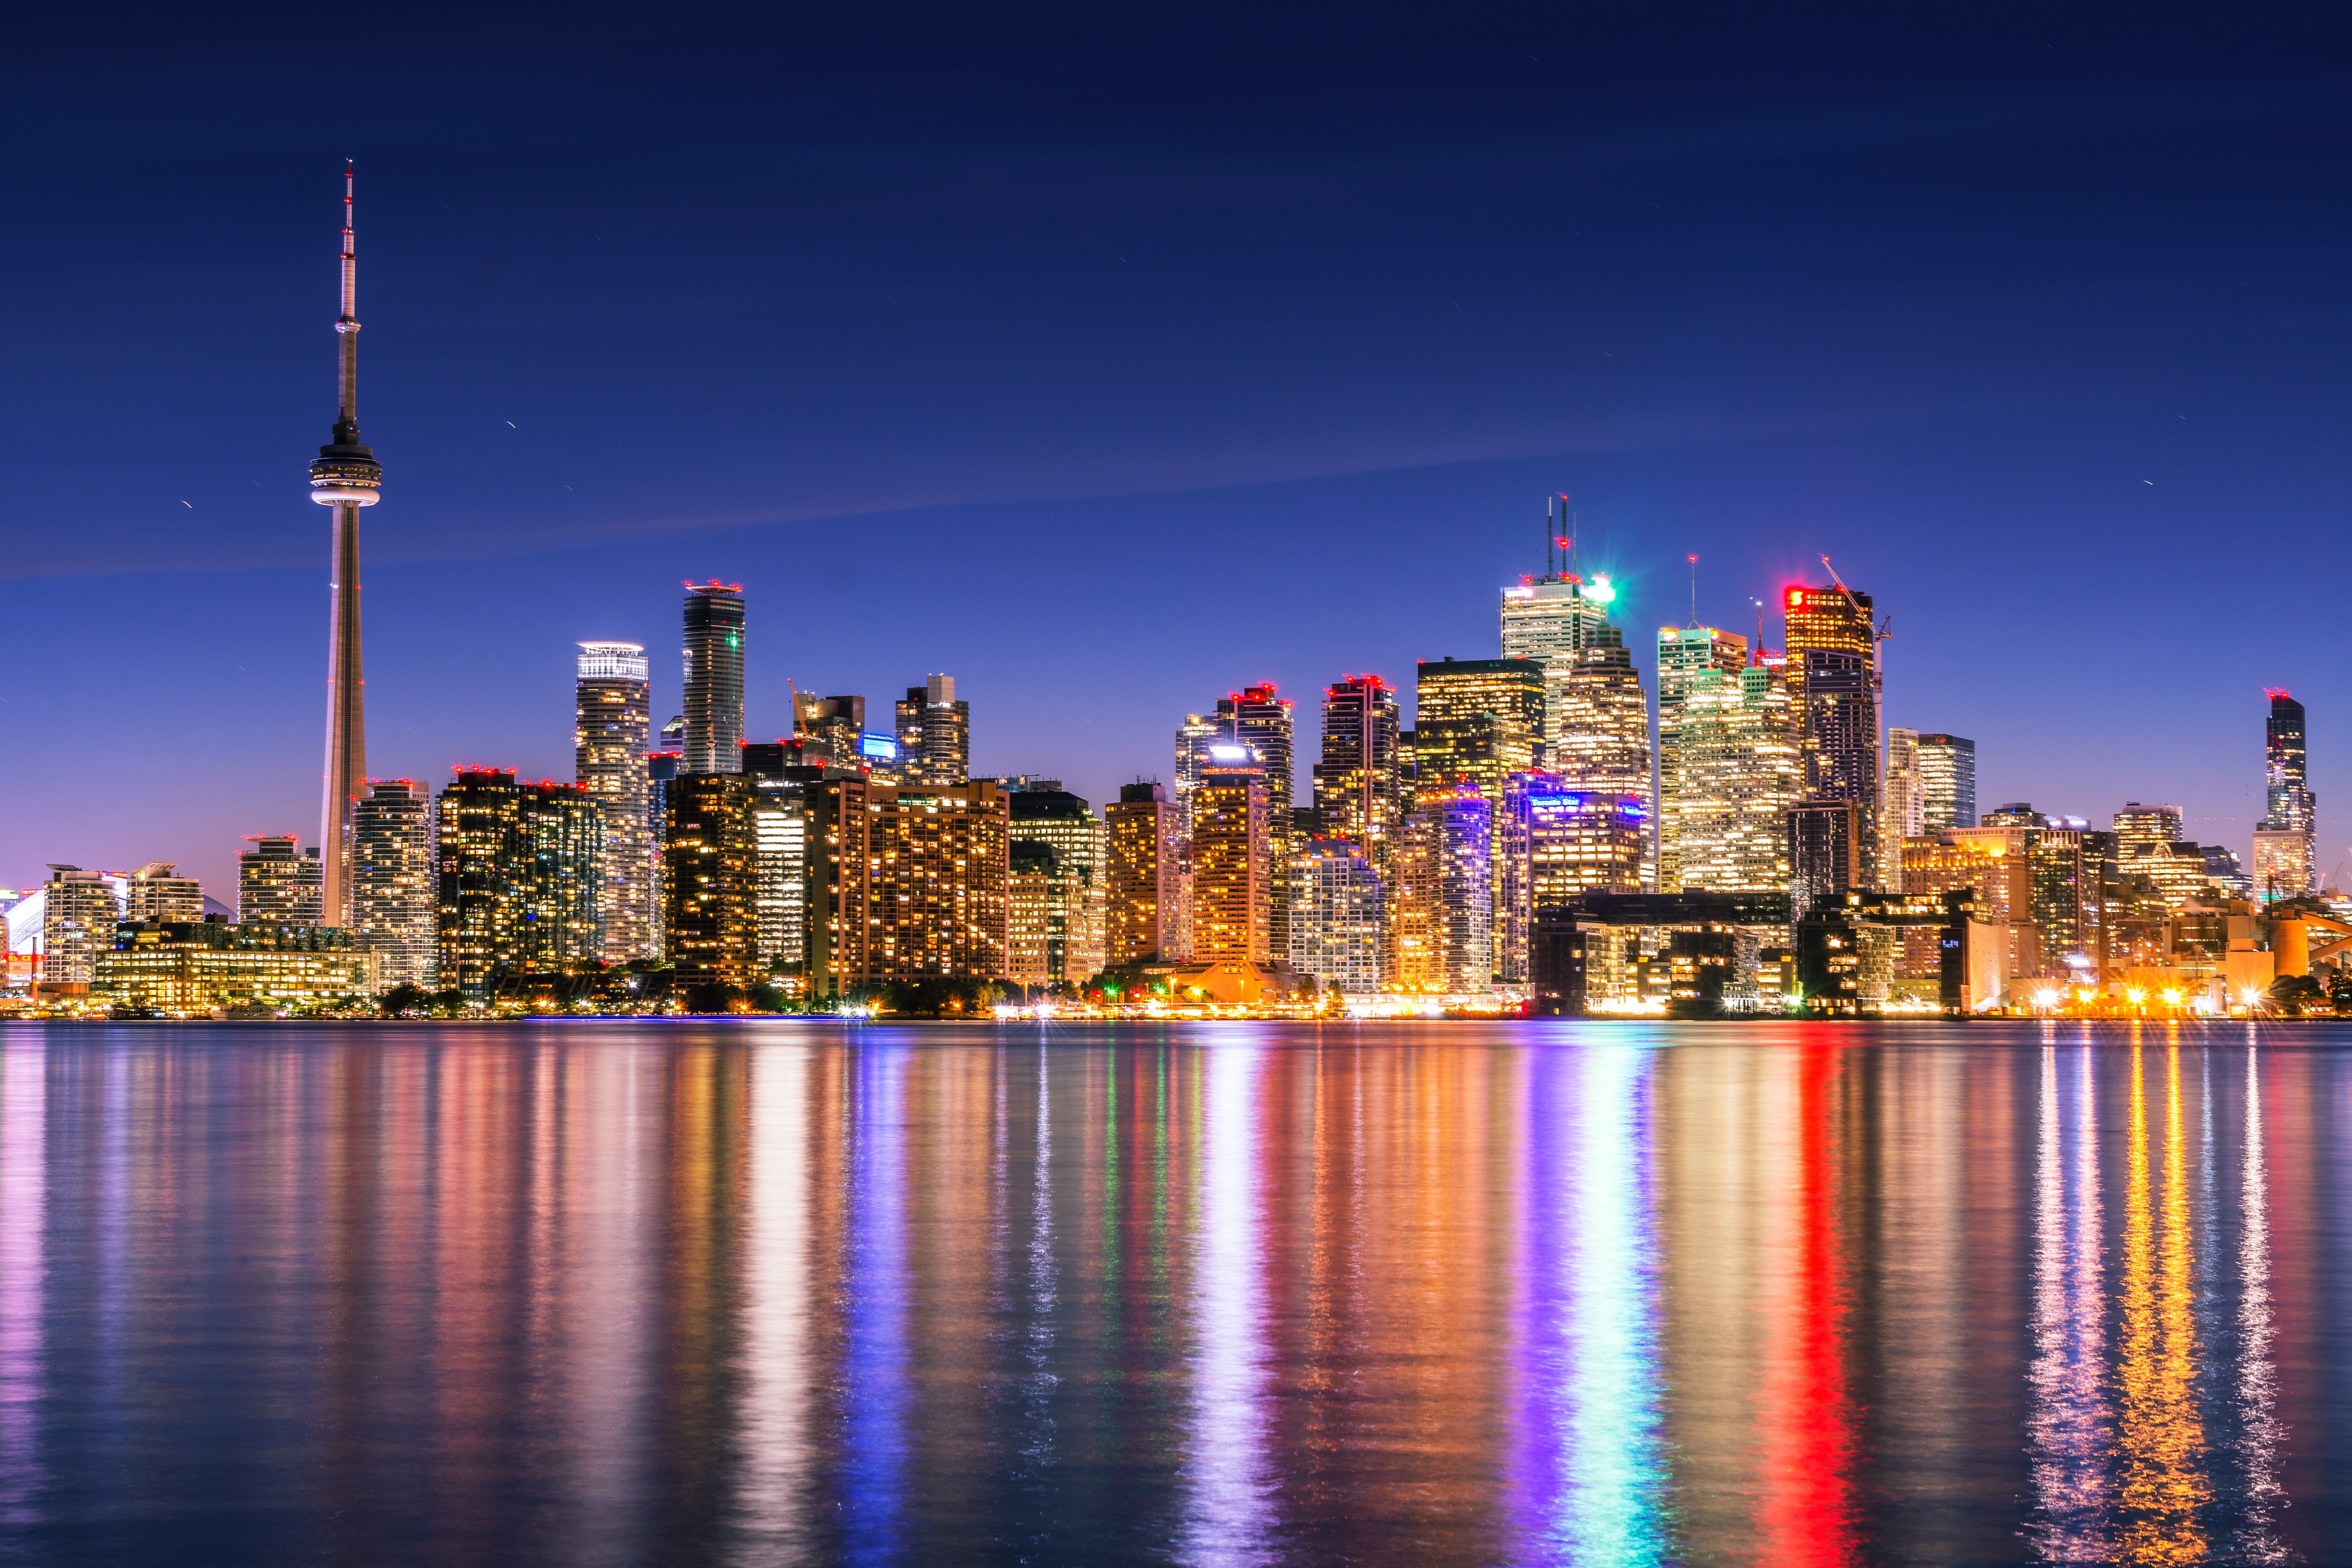 HD wallpaper, Multicolor, Cityscape, Reflections, Toronto Skyline, Modern Architecture, Clear Sky, Dusk, Waterfront, Canada, Night Lights, Skyscrapers, 5K